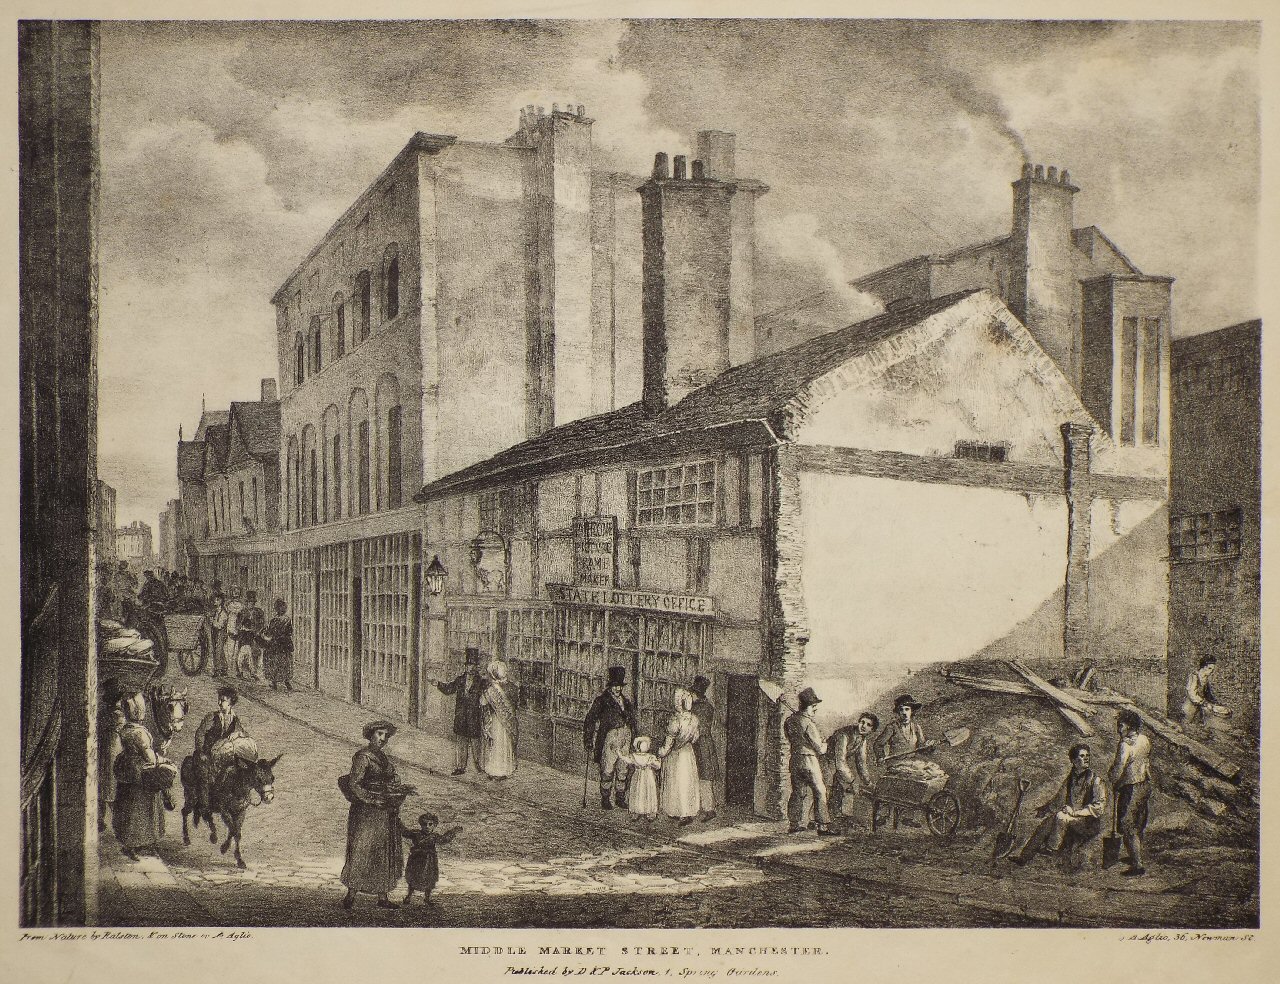 Lithograph - Middle Market Street, Manchester - Aglio